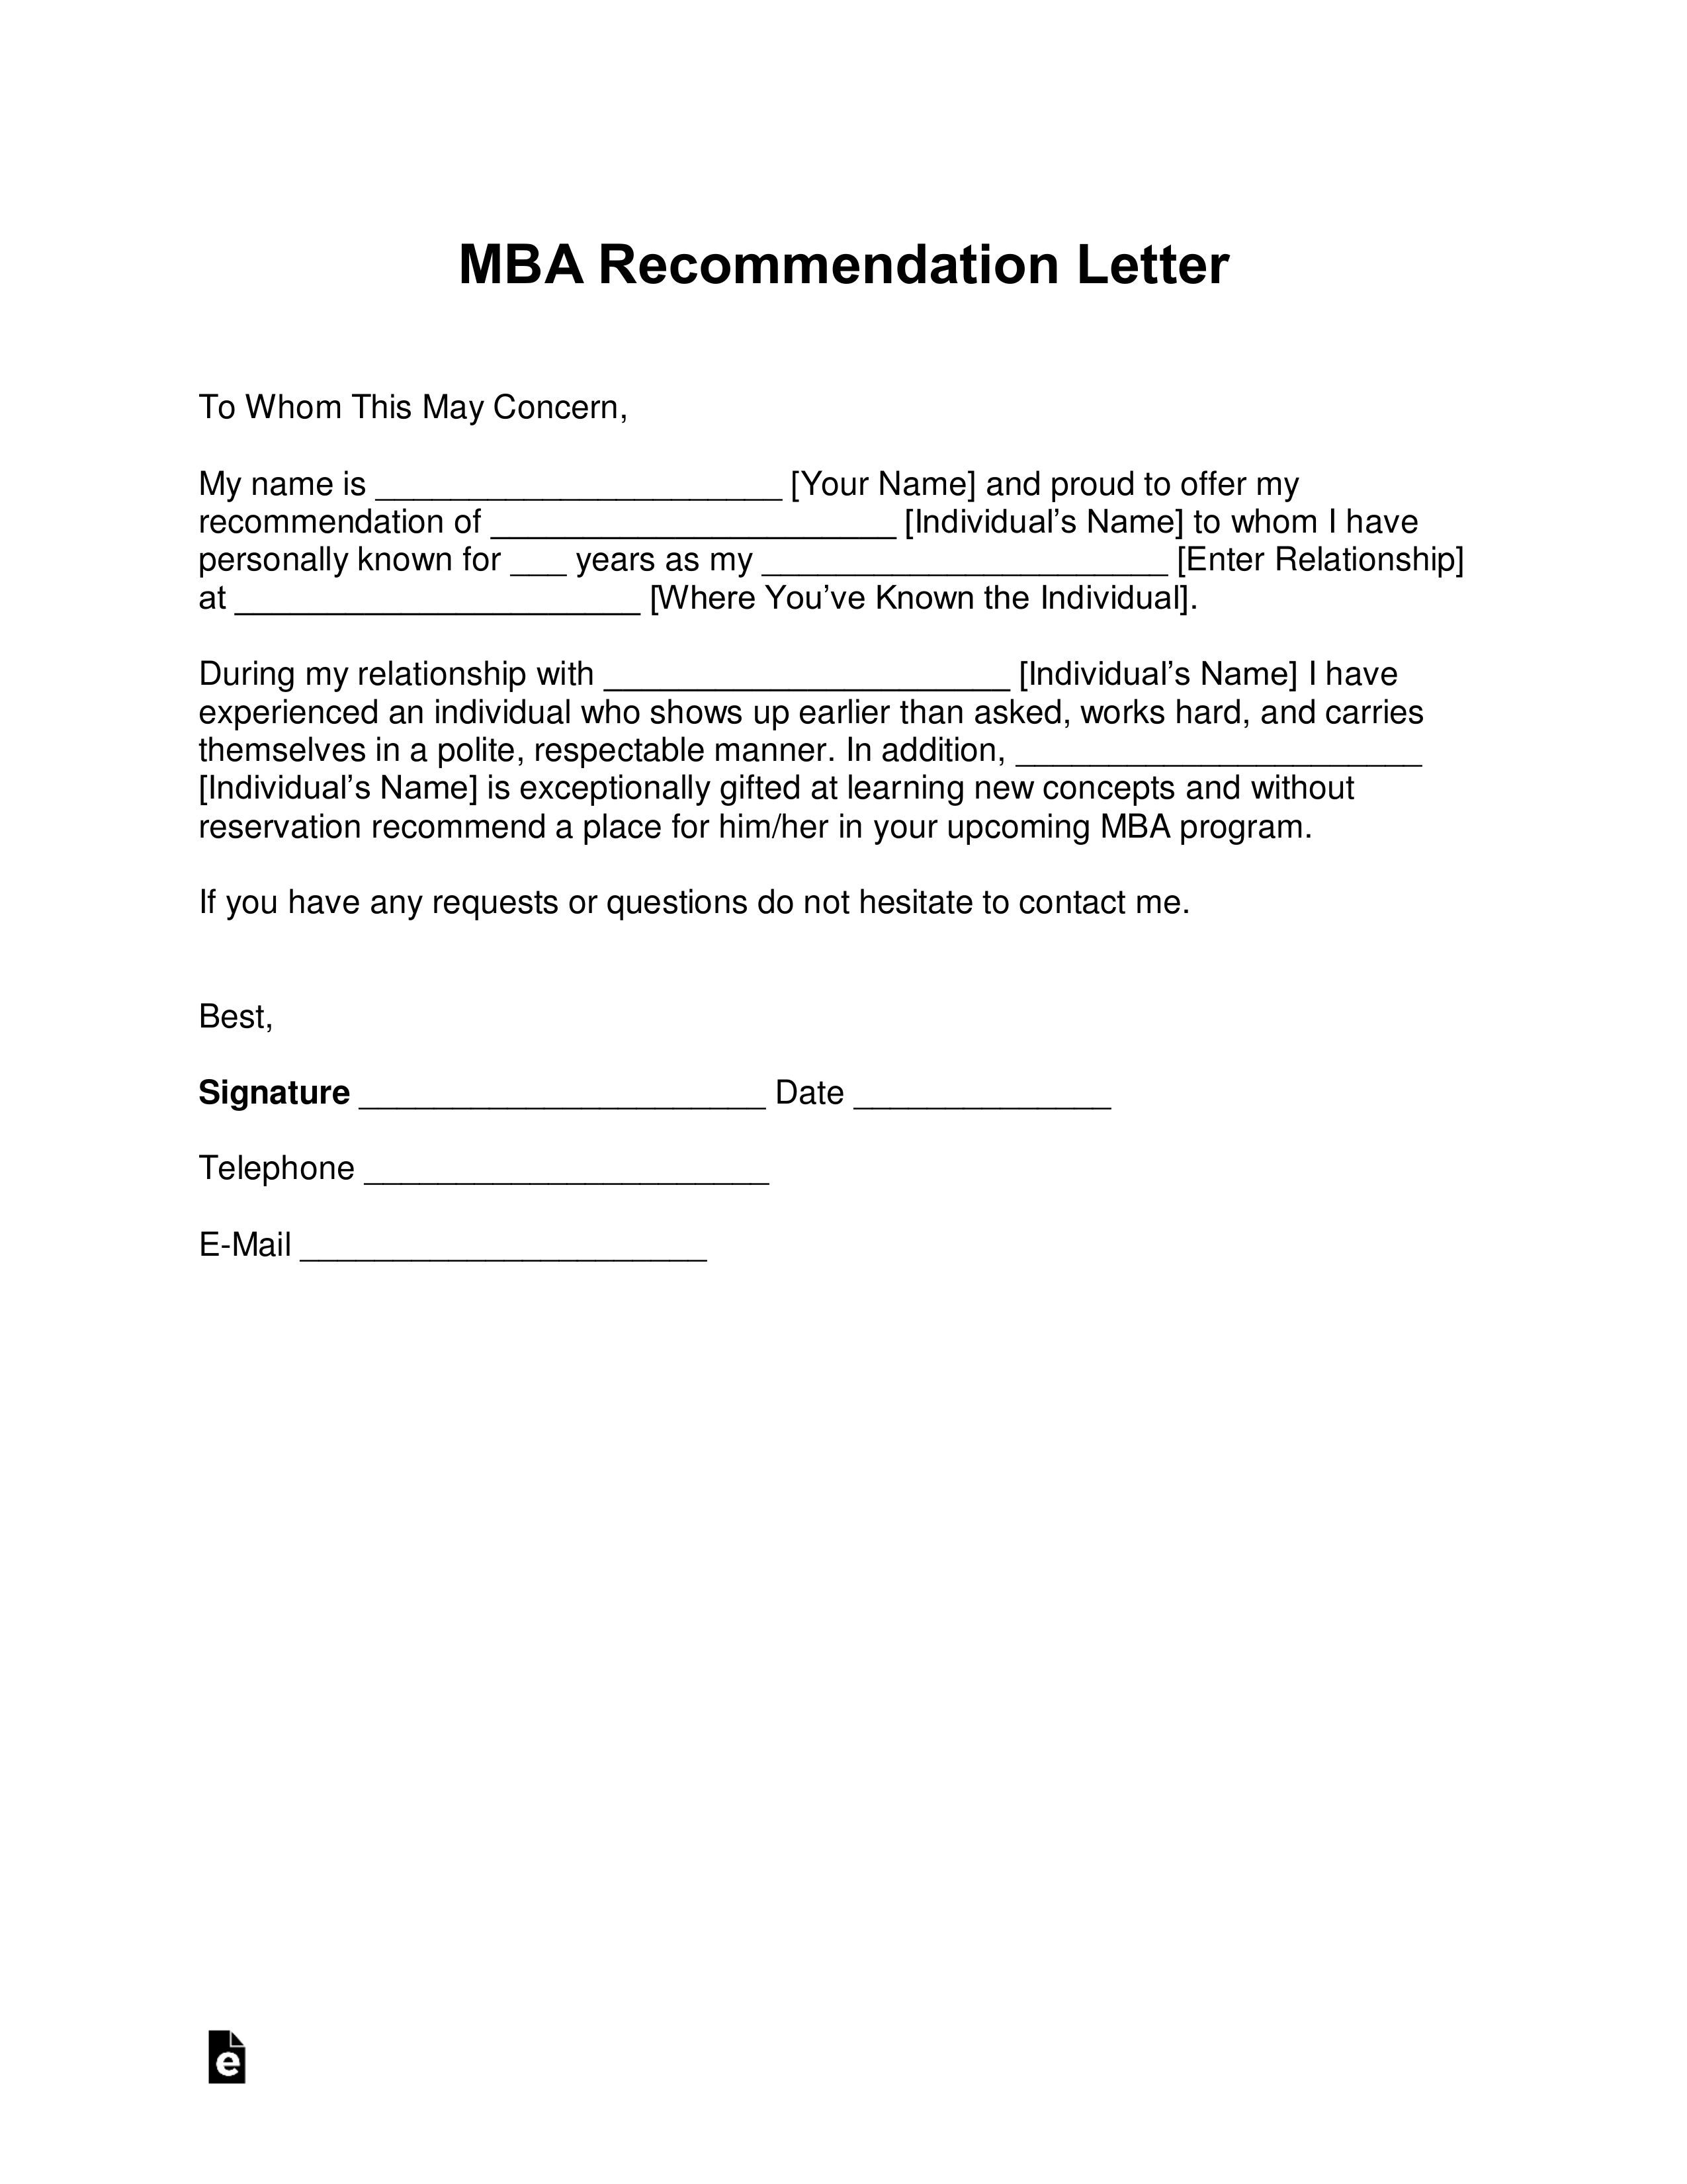 Mba Recommendation Letter Sample from eforms.com